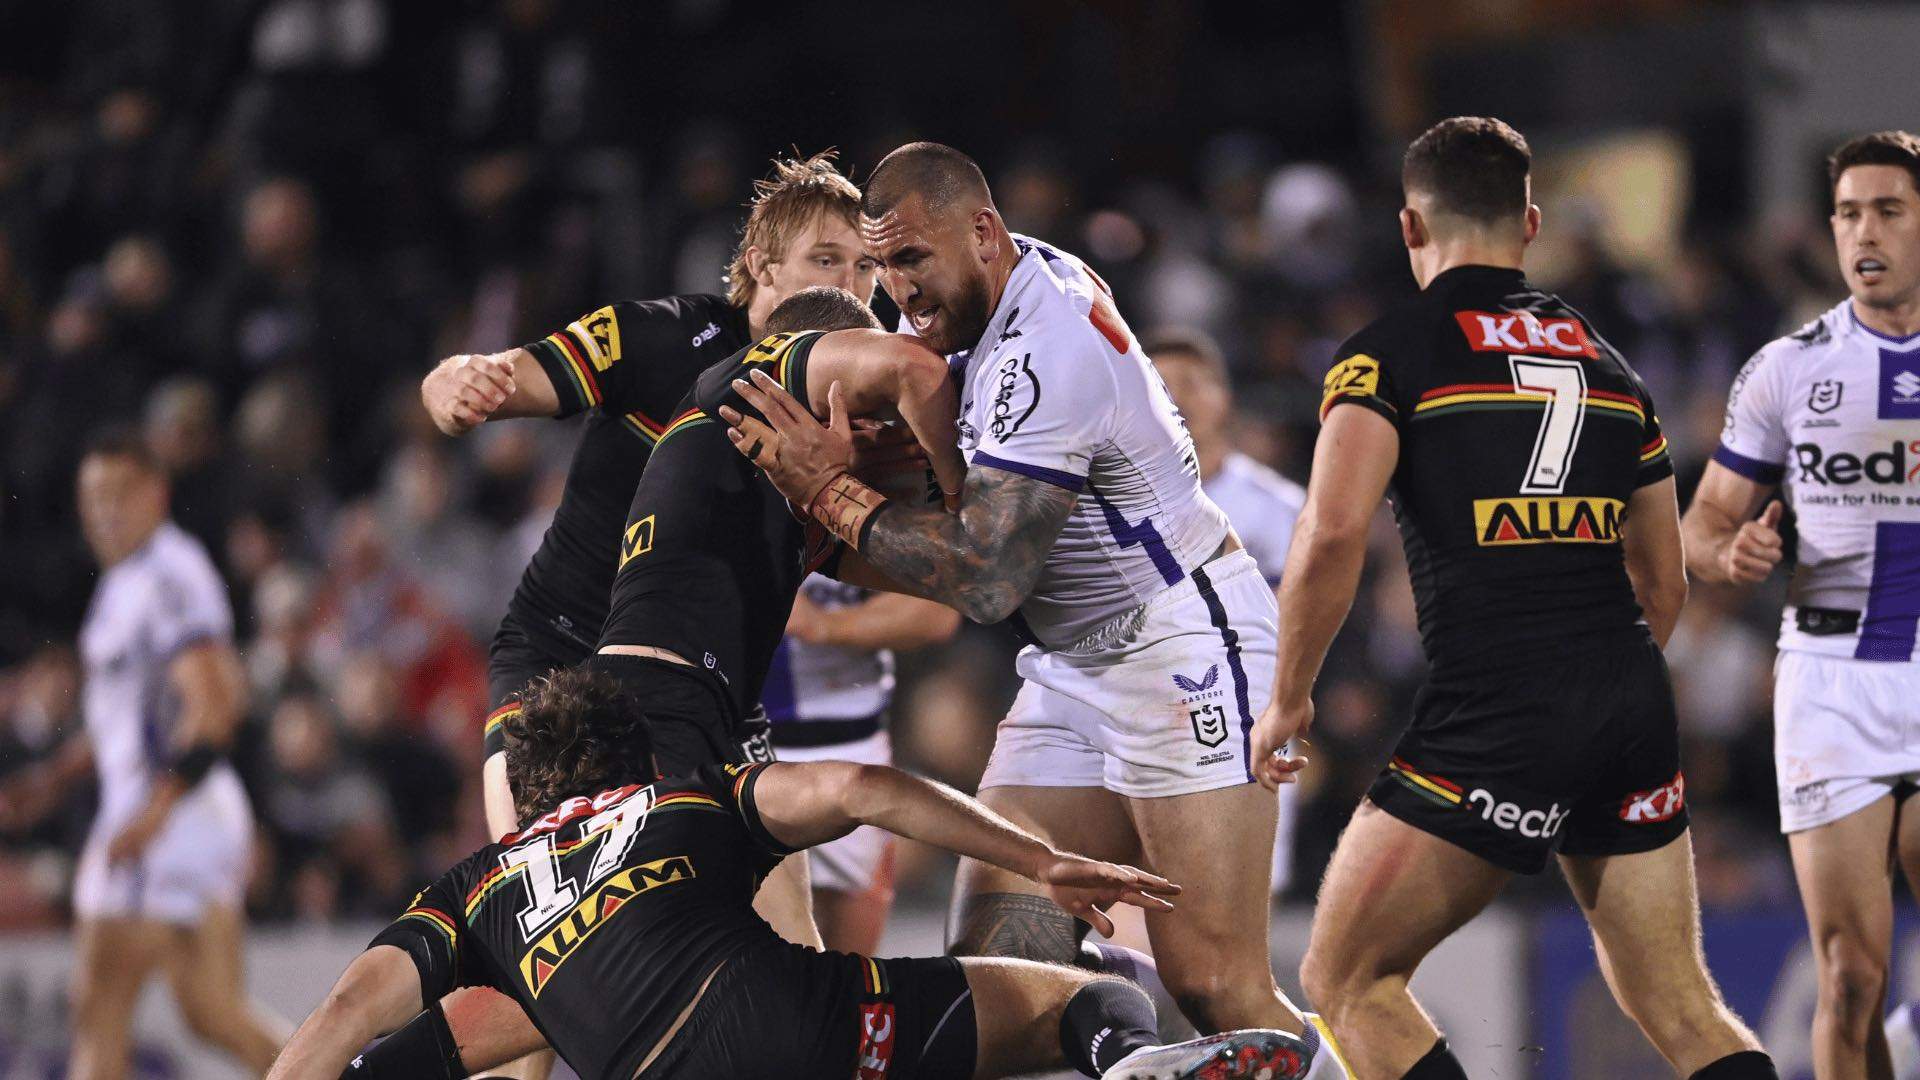 Photo of an NRL game in action.